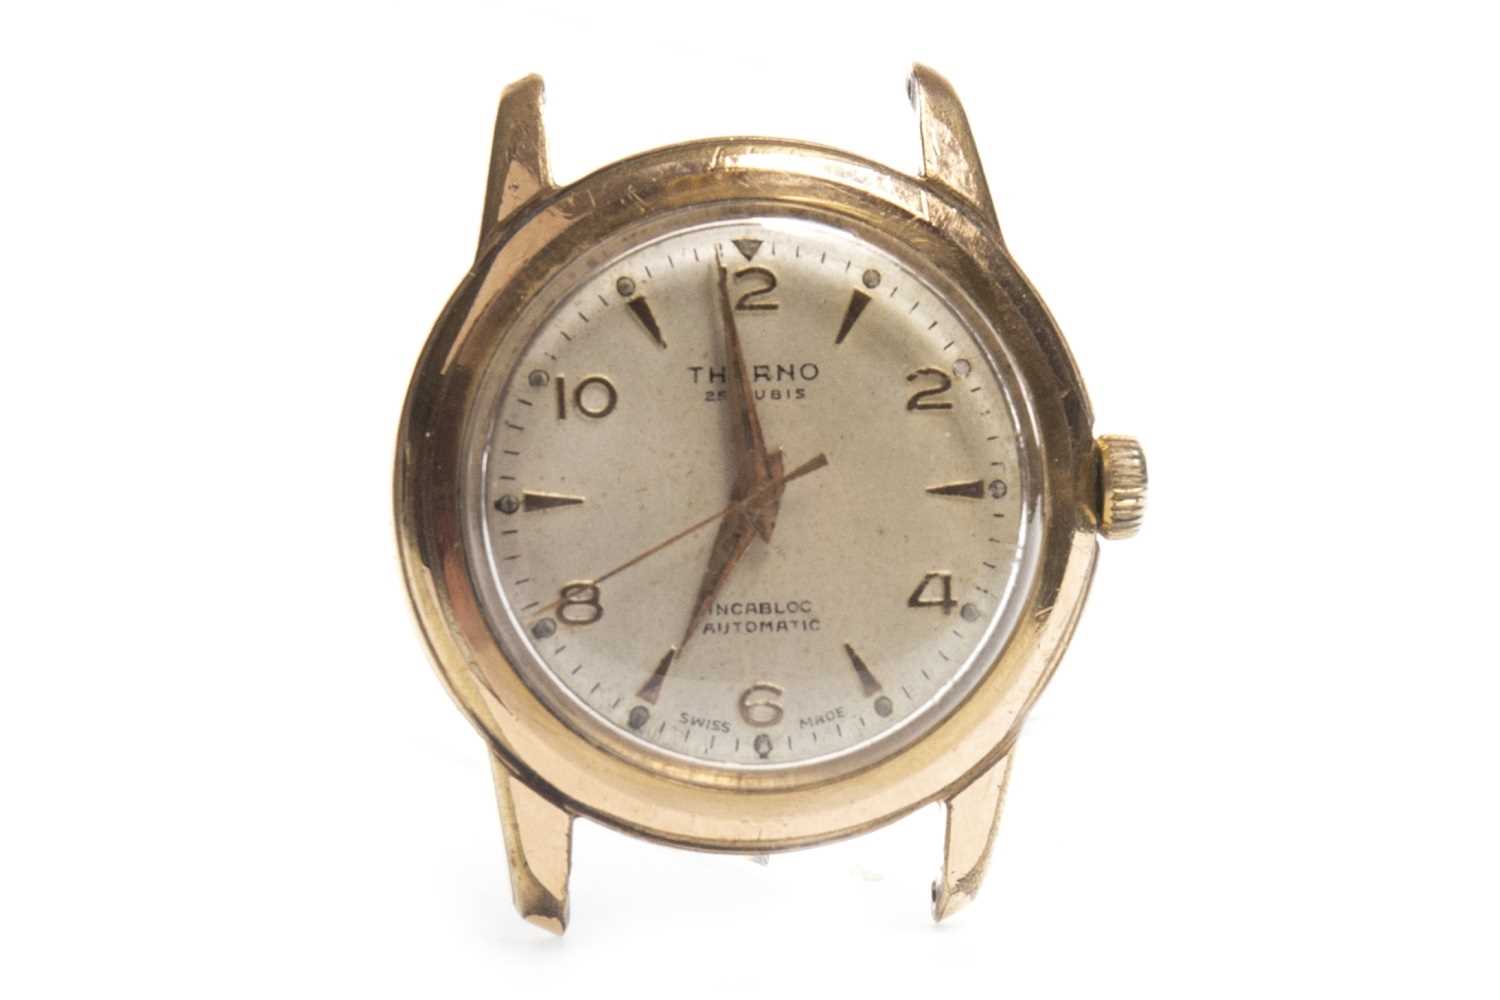 Lot 864 - A GENTLEMAN'S THERNO AUTOMATIC PLATED WATCH